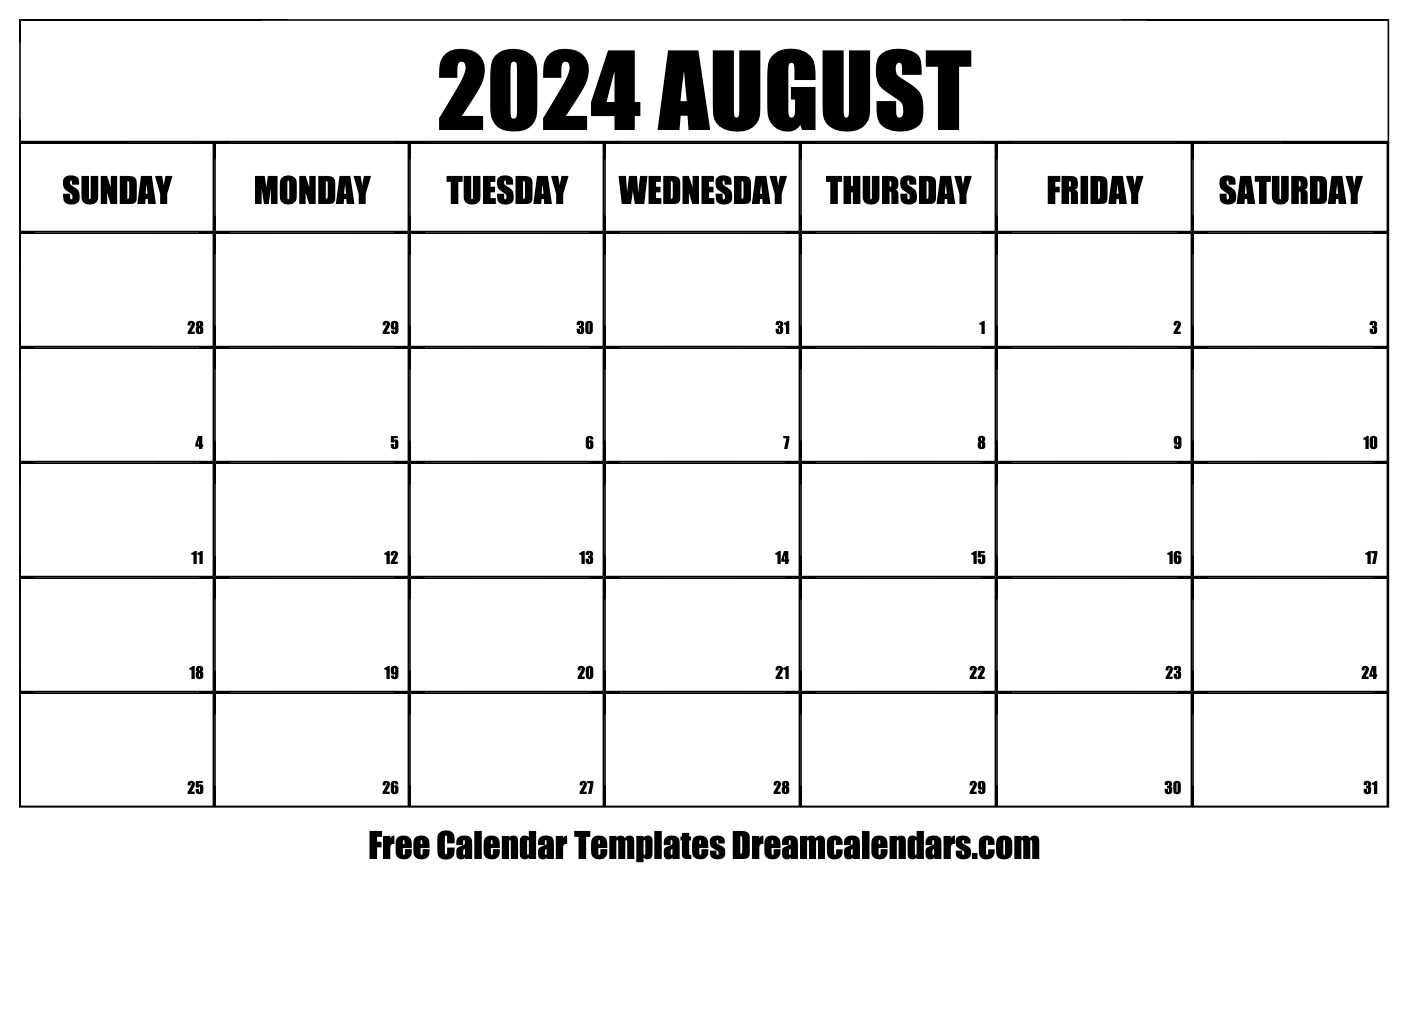 August 2024 Calendar Free Blank Printable With Holidays